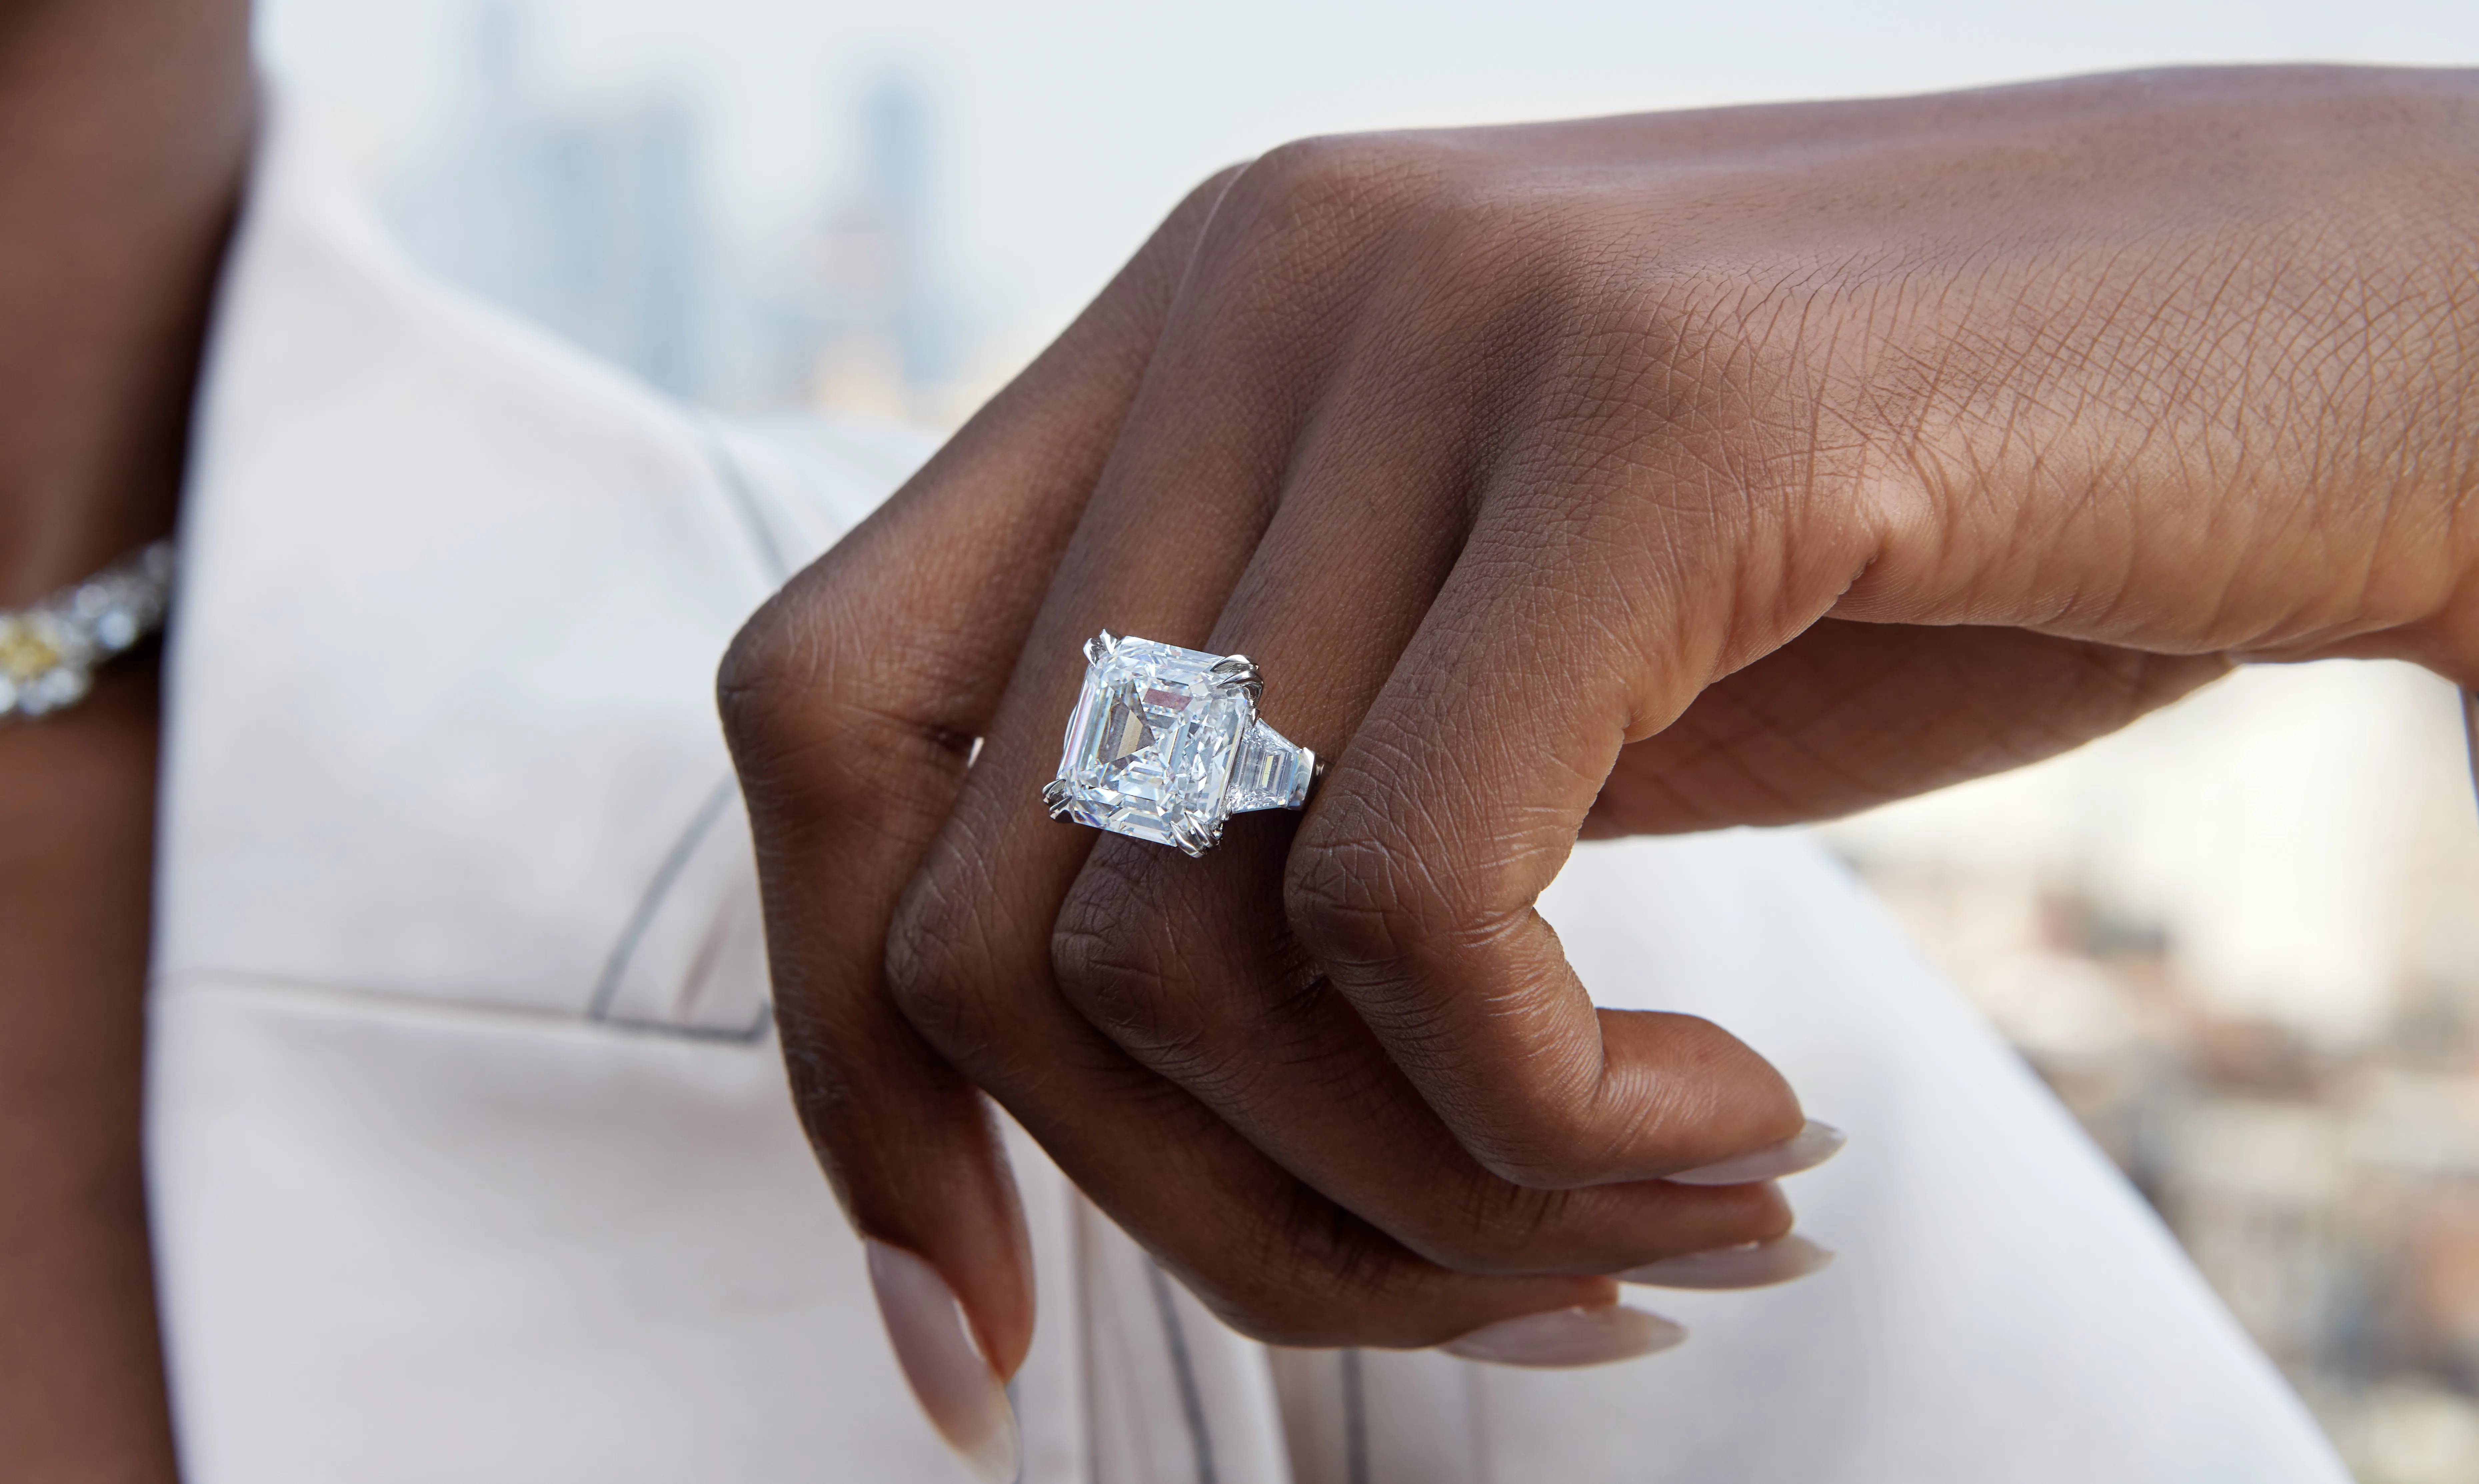 How to Sell a Diamond Ring - Everything You Should Know